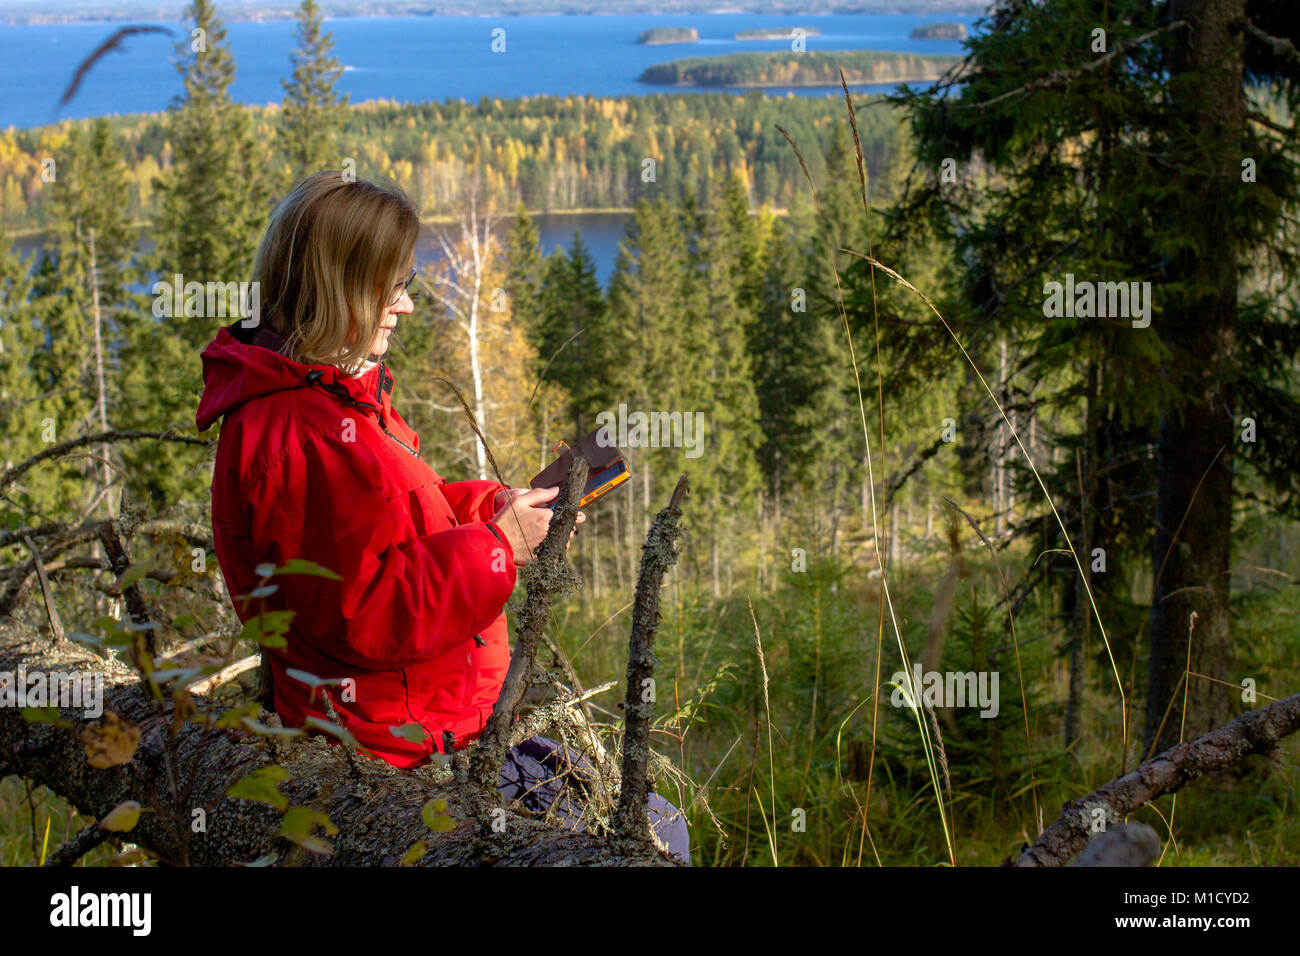 Woman using phone in forest Stock Photo